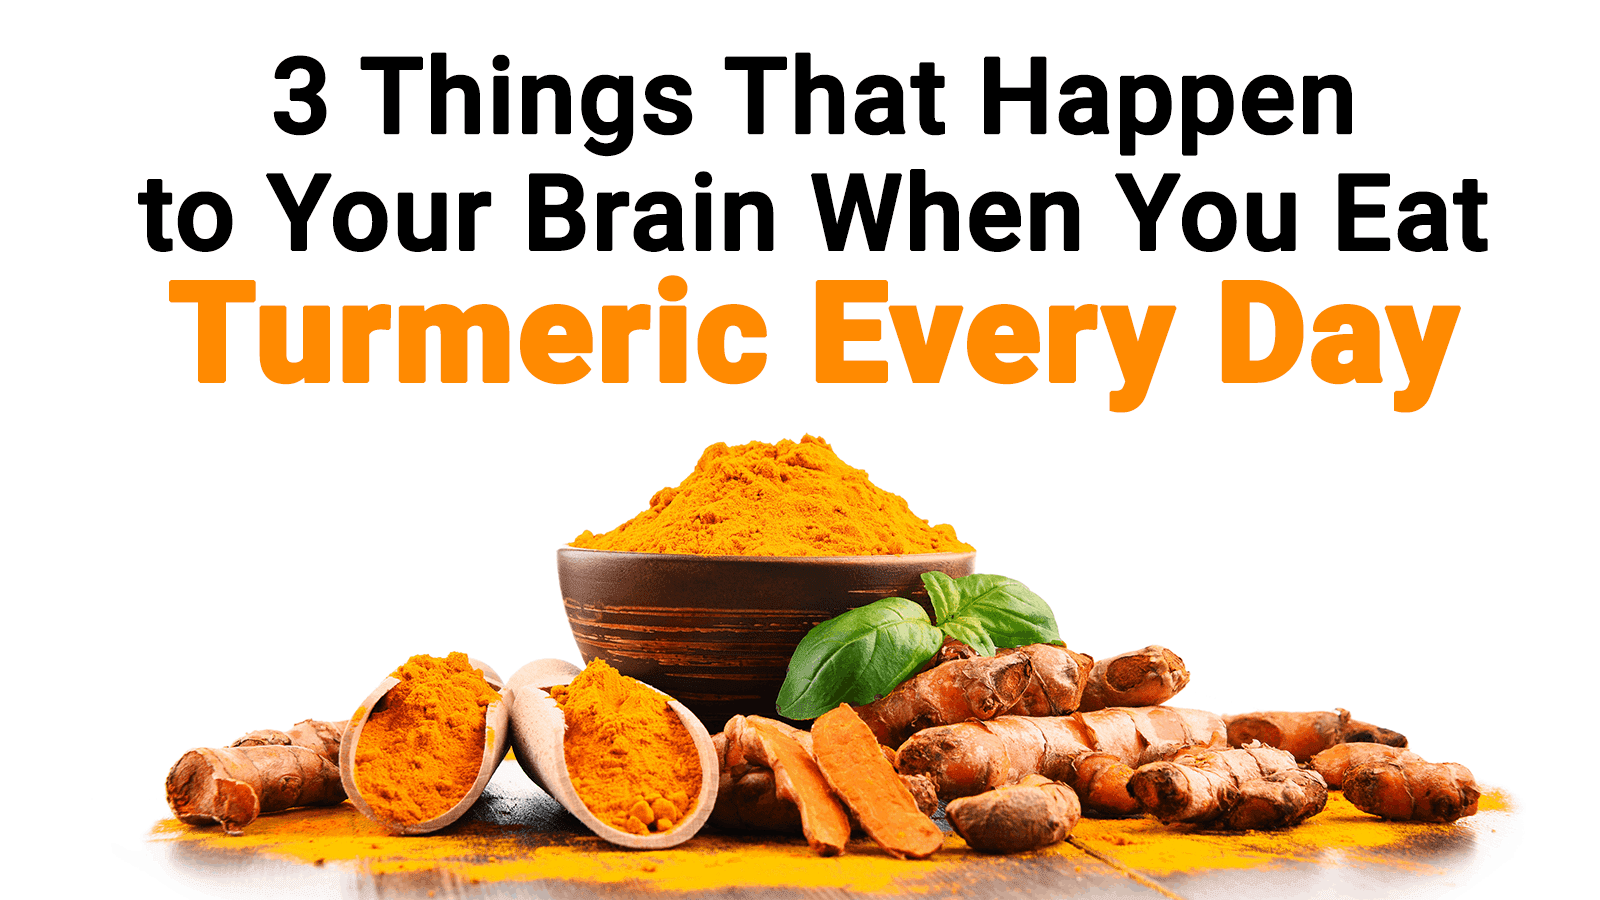 3 Things That Happen to Your Brain When You Eat Turmeric Every Day